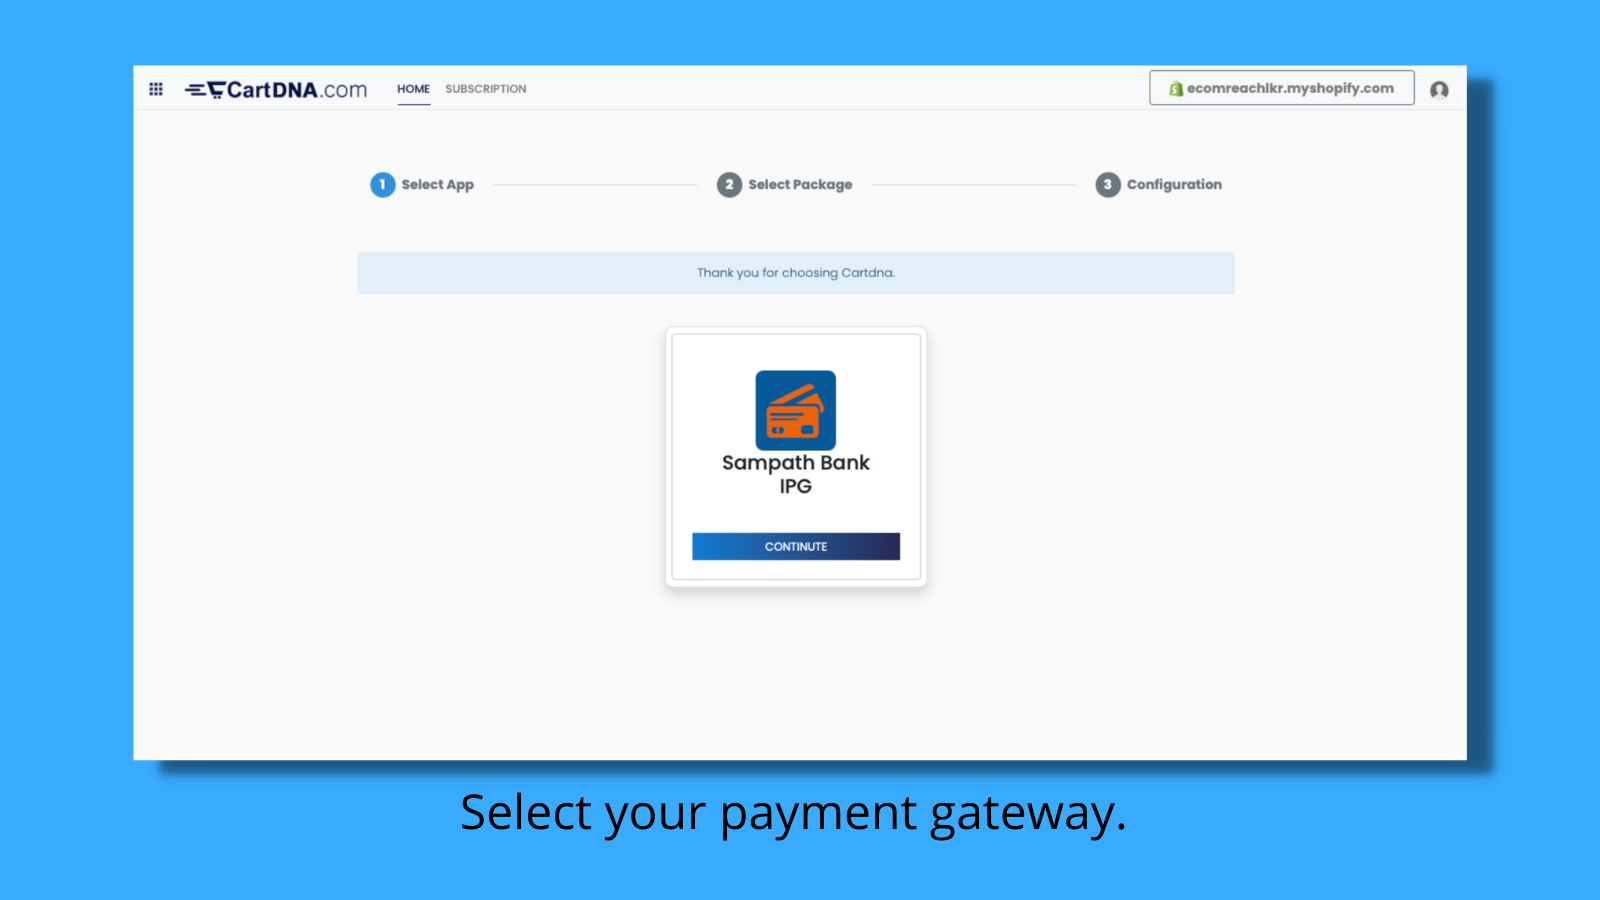 Select your gateway once redirected to your admin portal